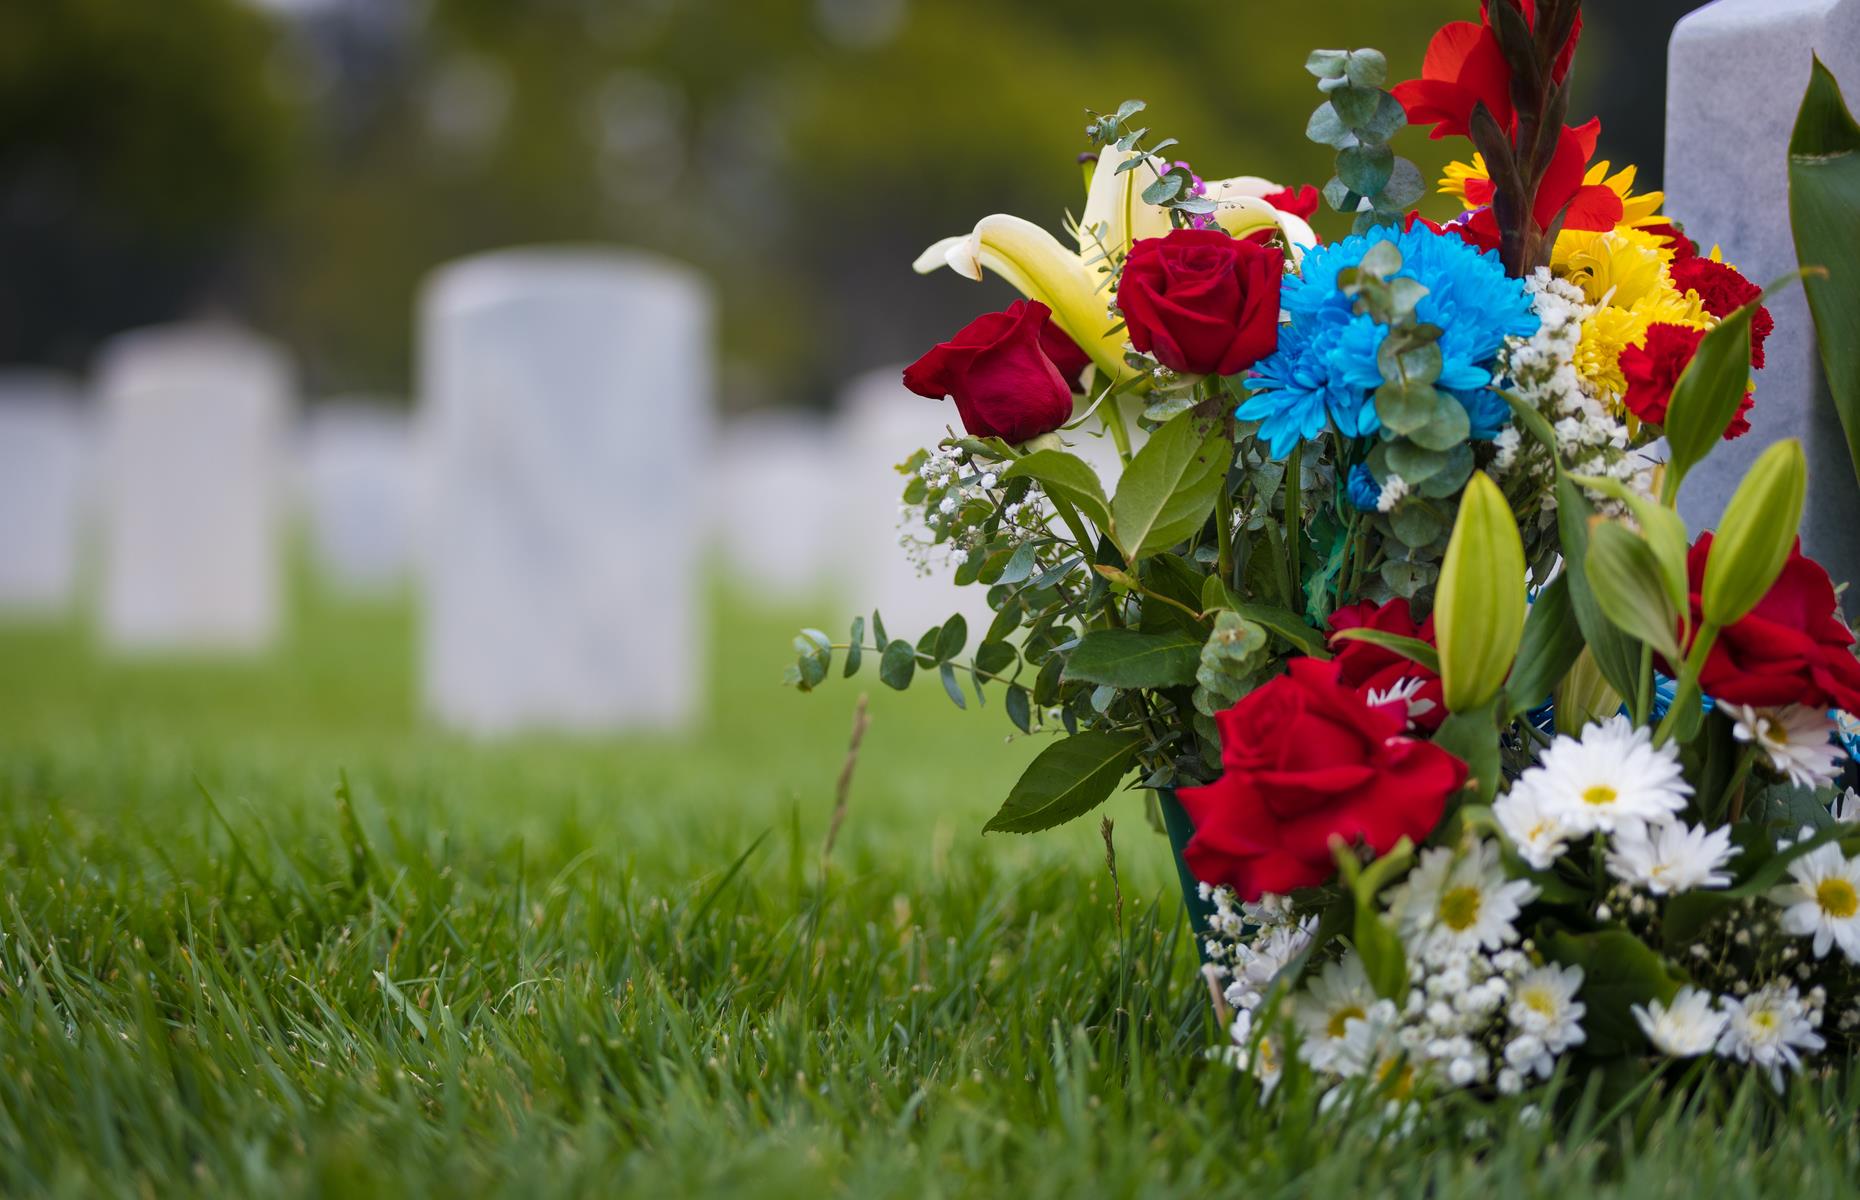 Almost 13 million Americans know someone who died because they couldn't afford medical care